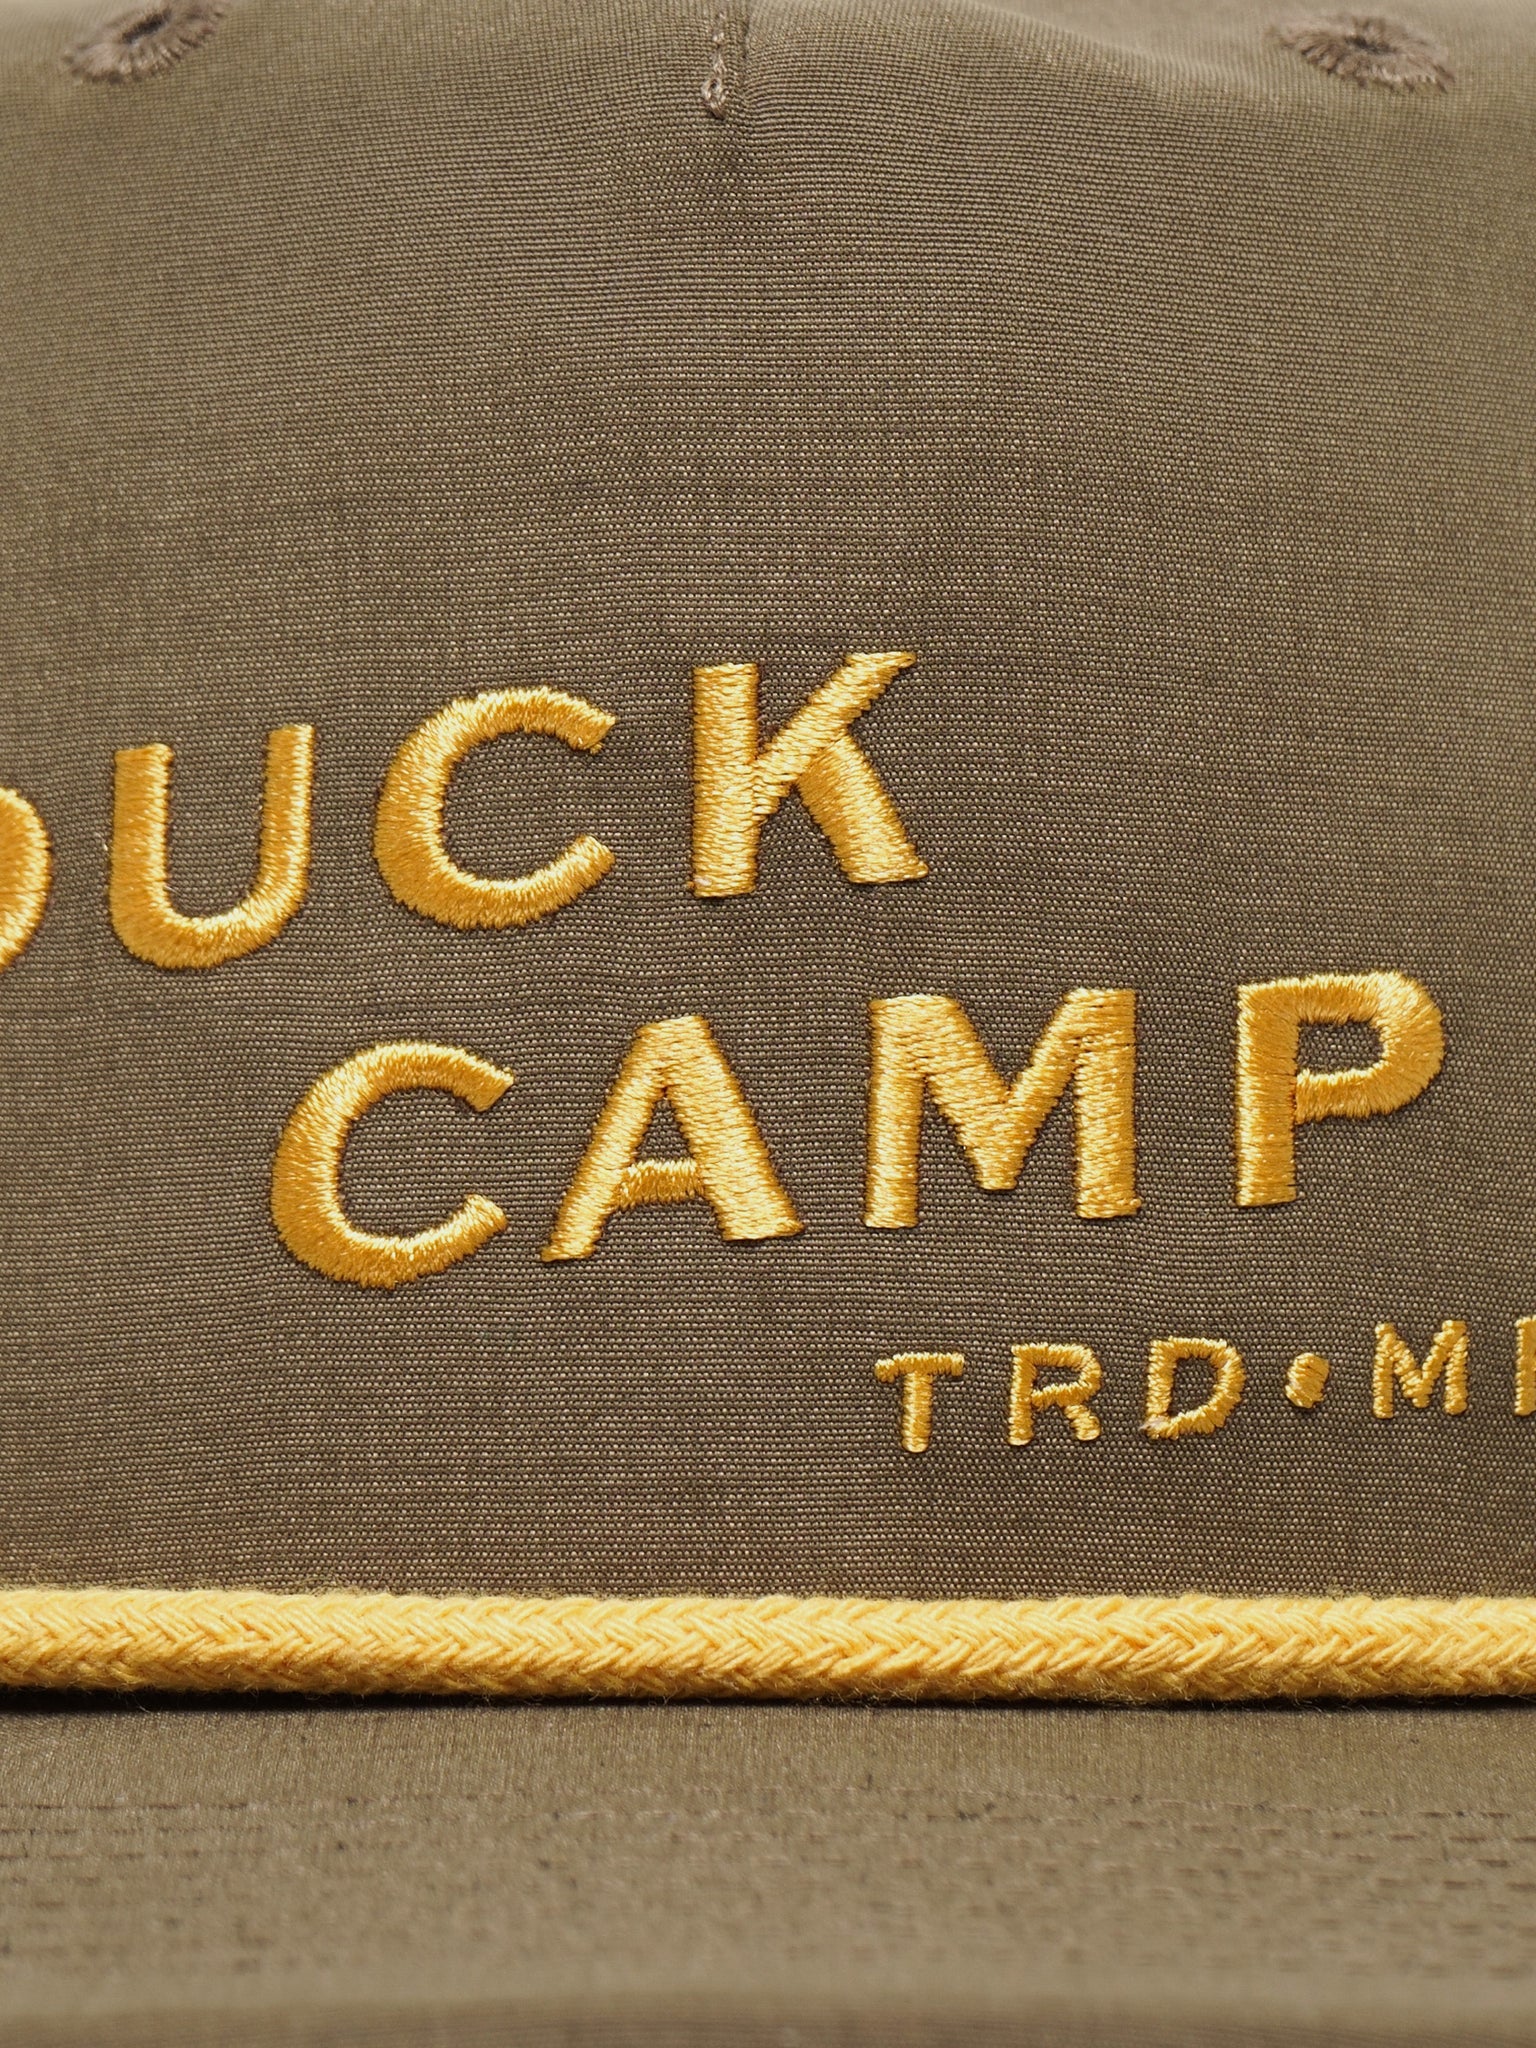 Hunting and Fishing Hats – Duck Camp